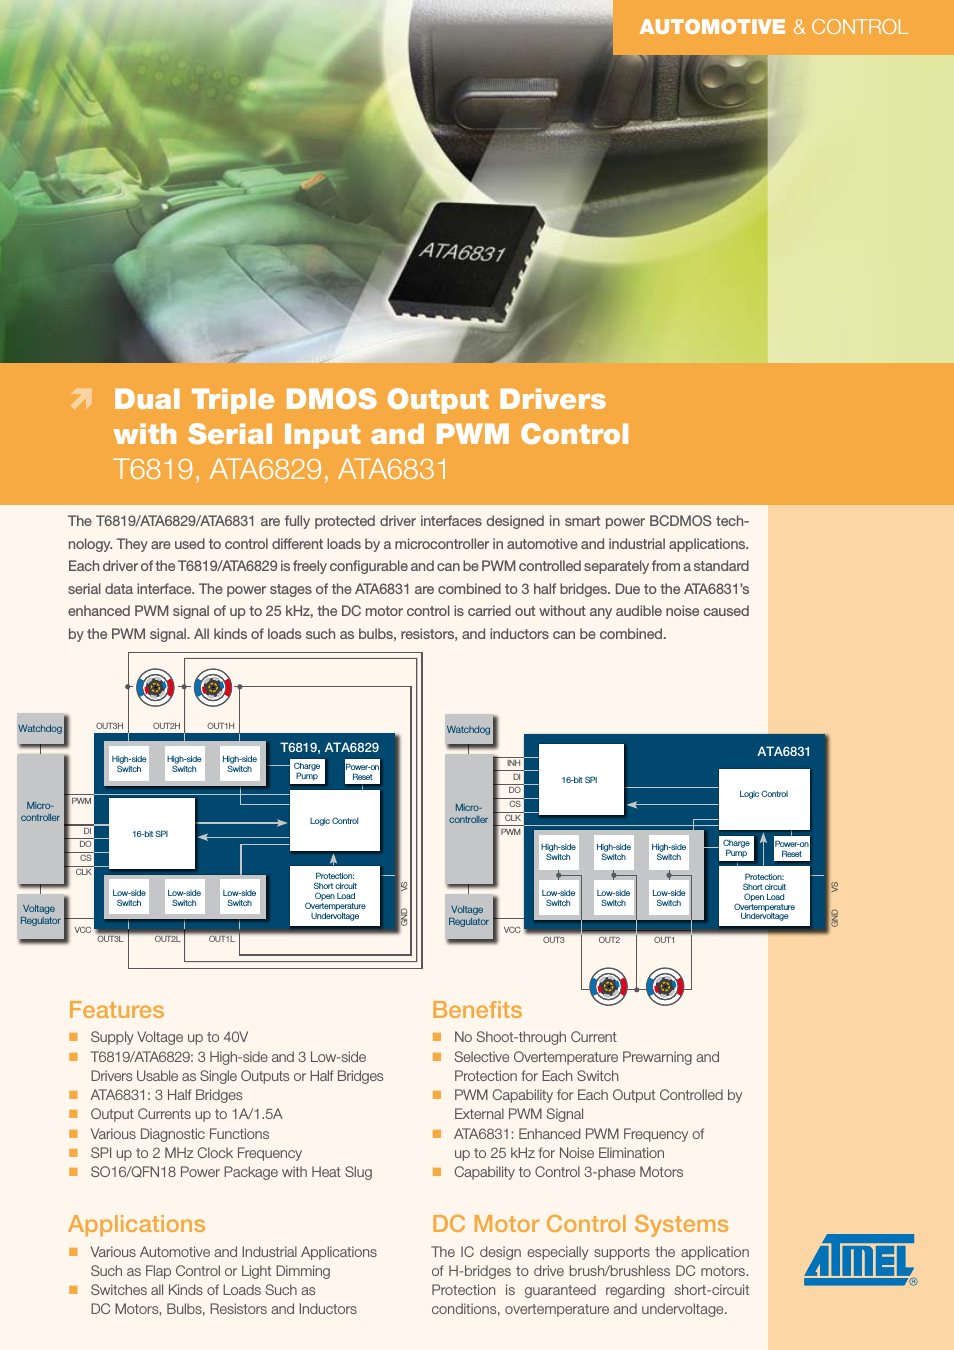 Dual Triple DMOS Output Drivers with Serial Input and PWM Control ATA6831